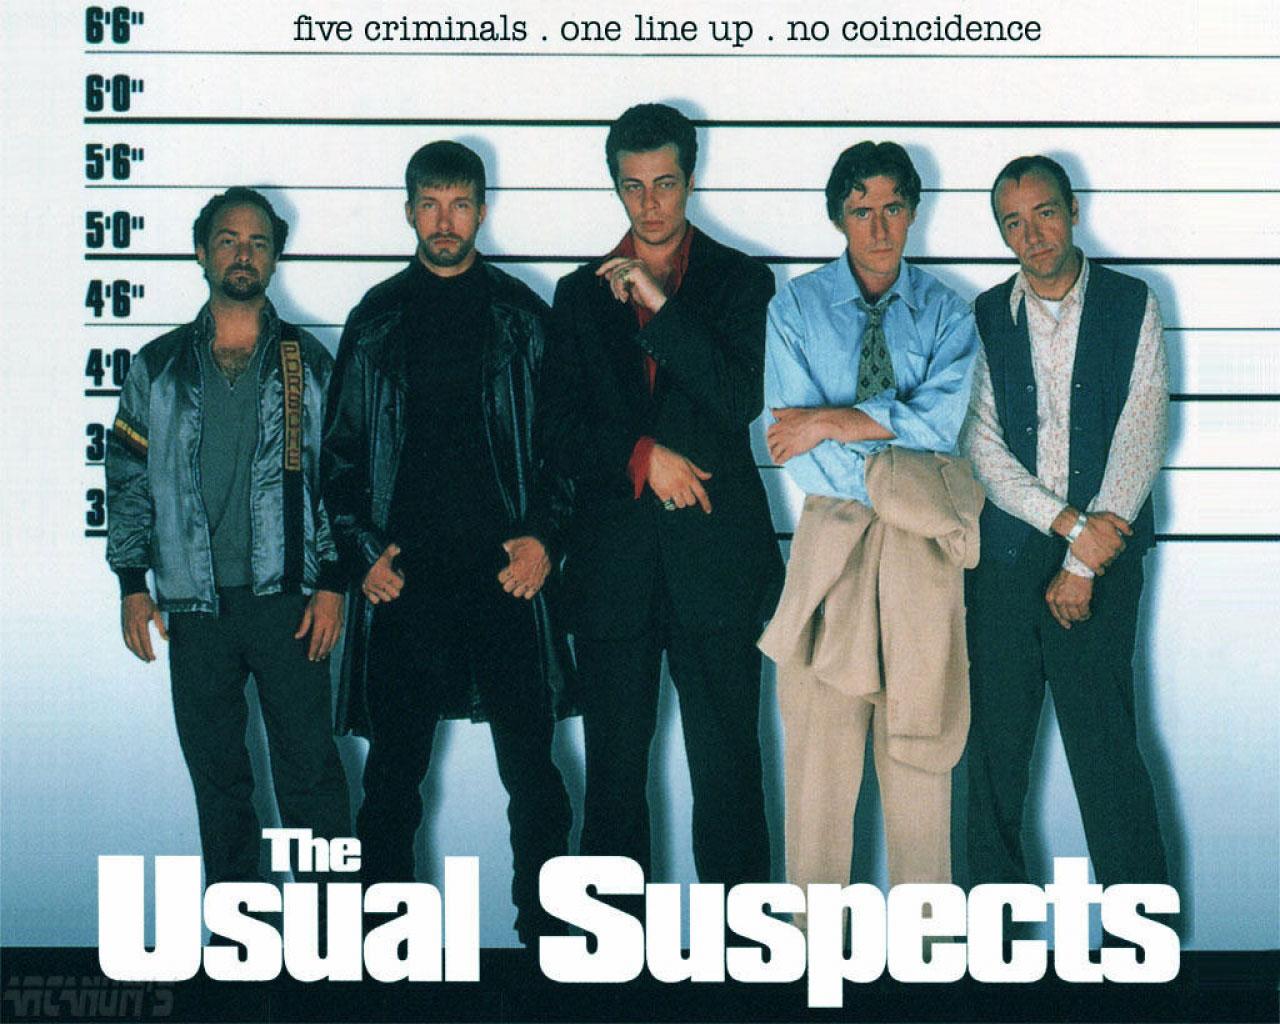 The Usual Suspects Wallpaper #1 1280 x 1024 